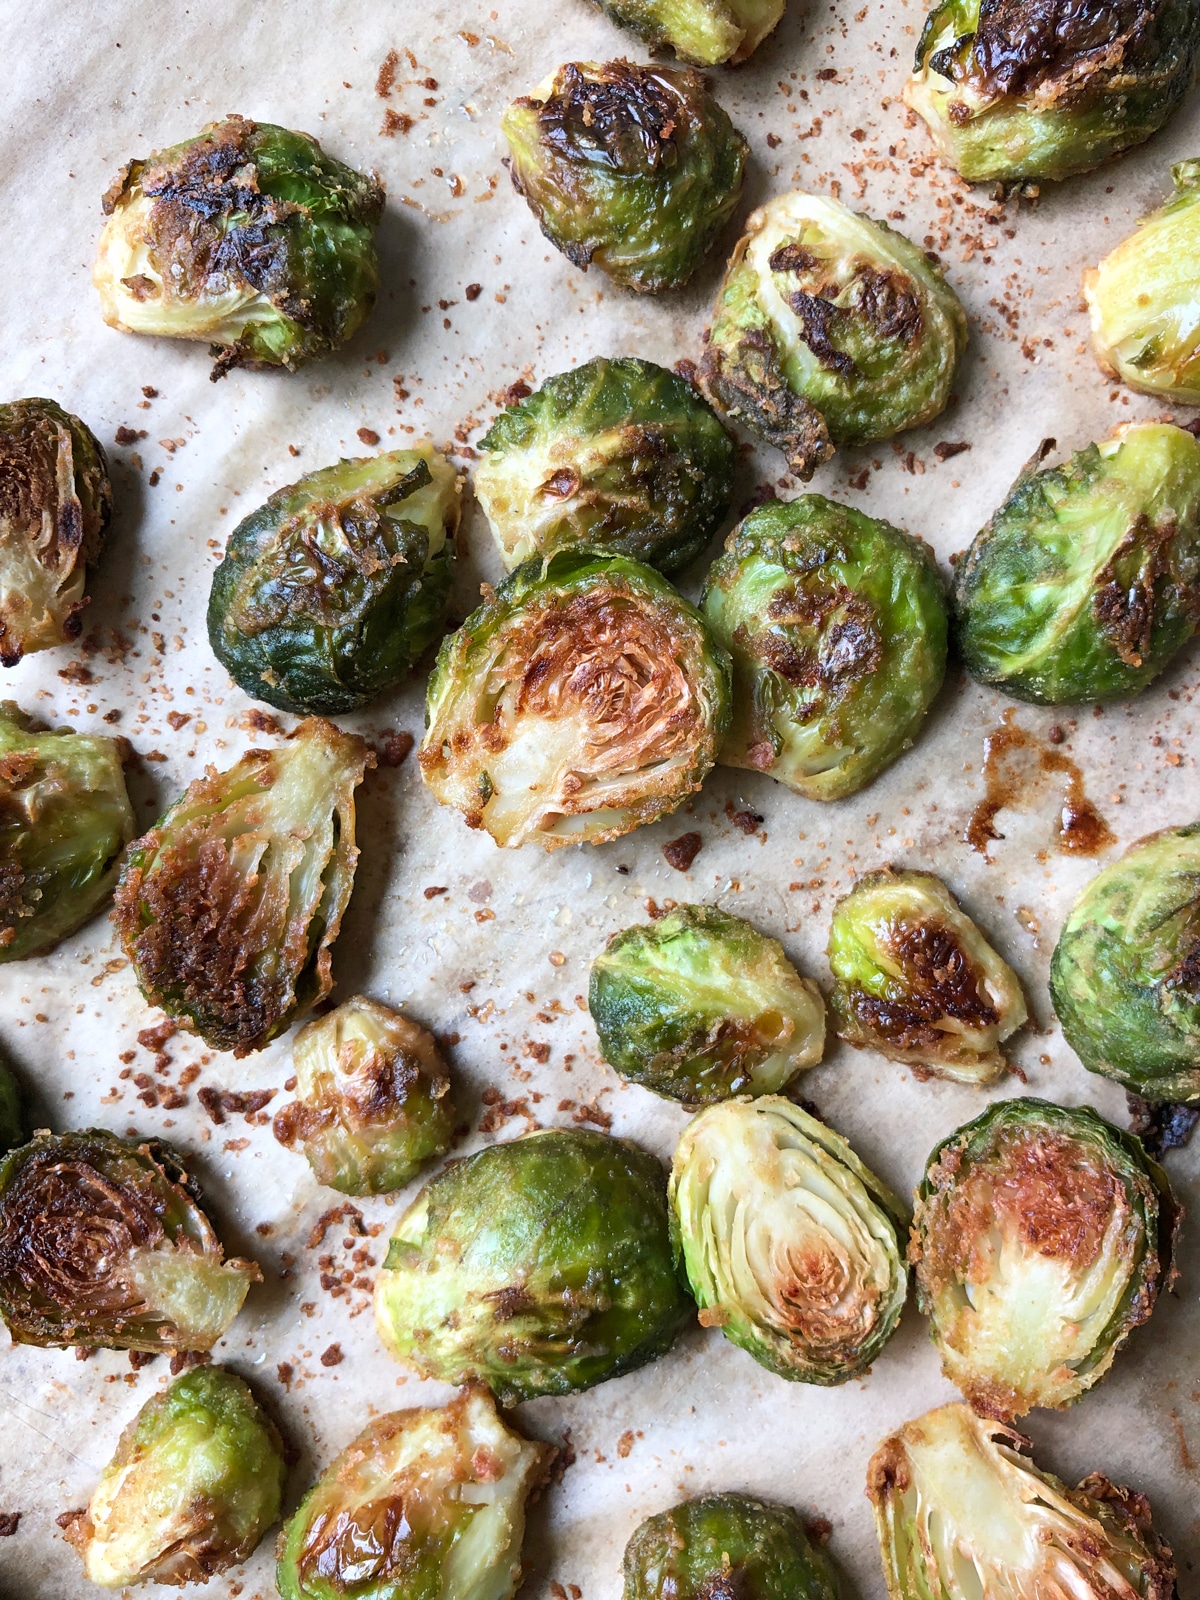 Coconut ginger brussels sprouts.